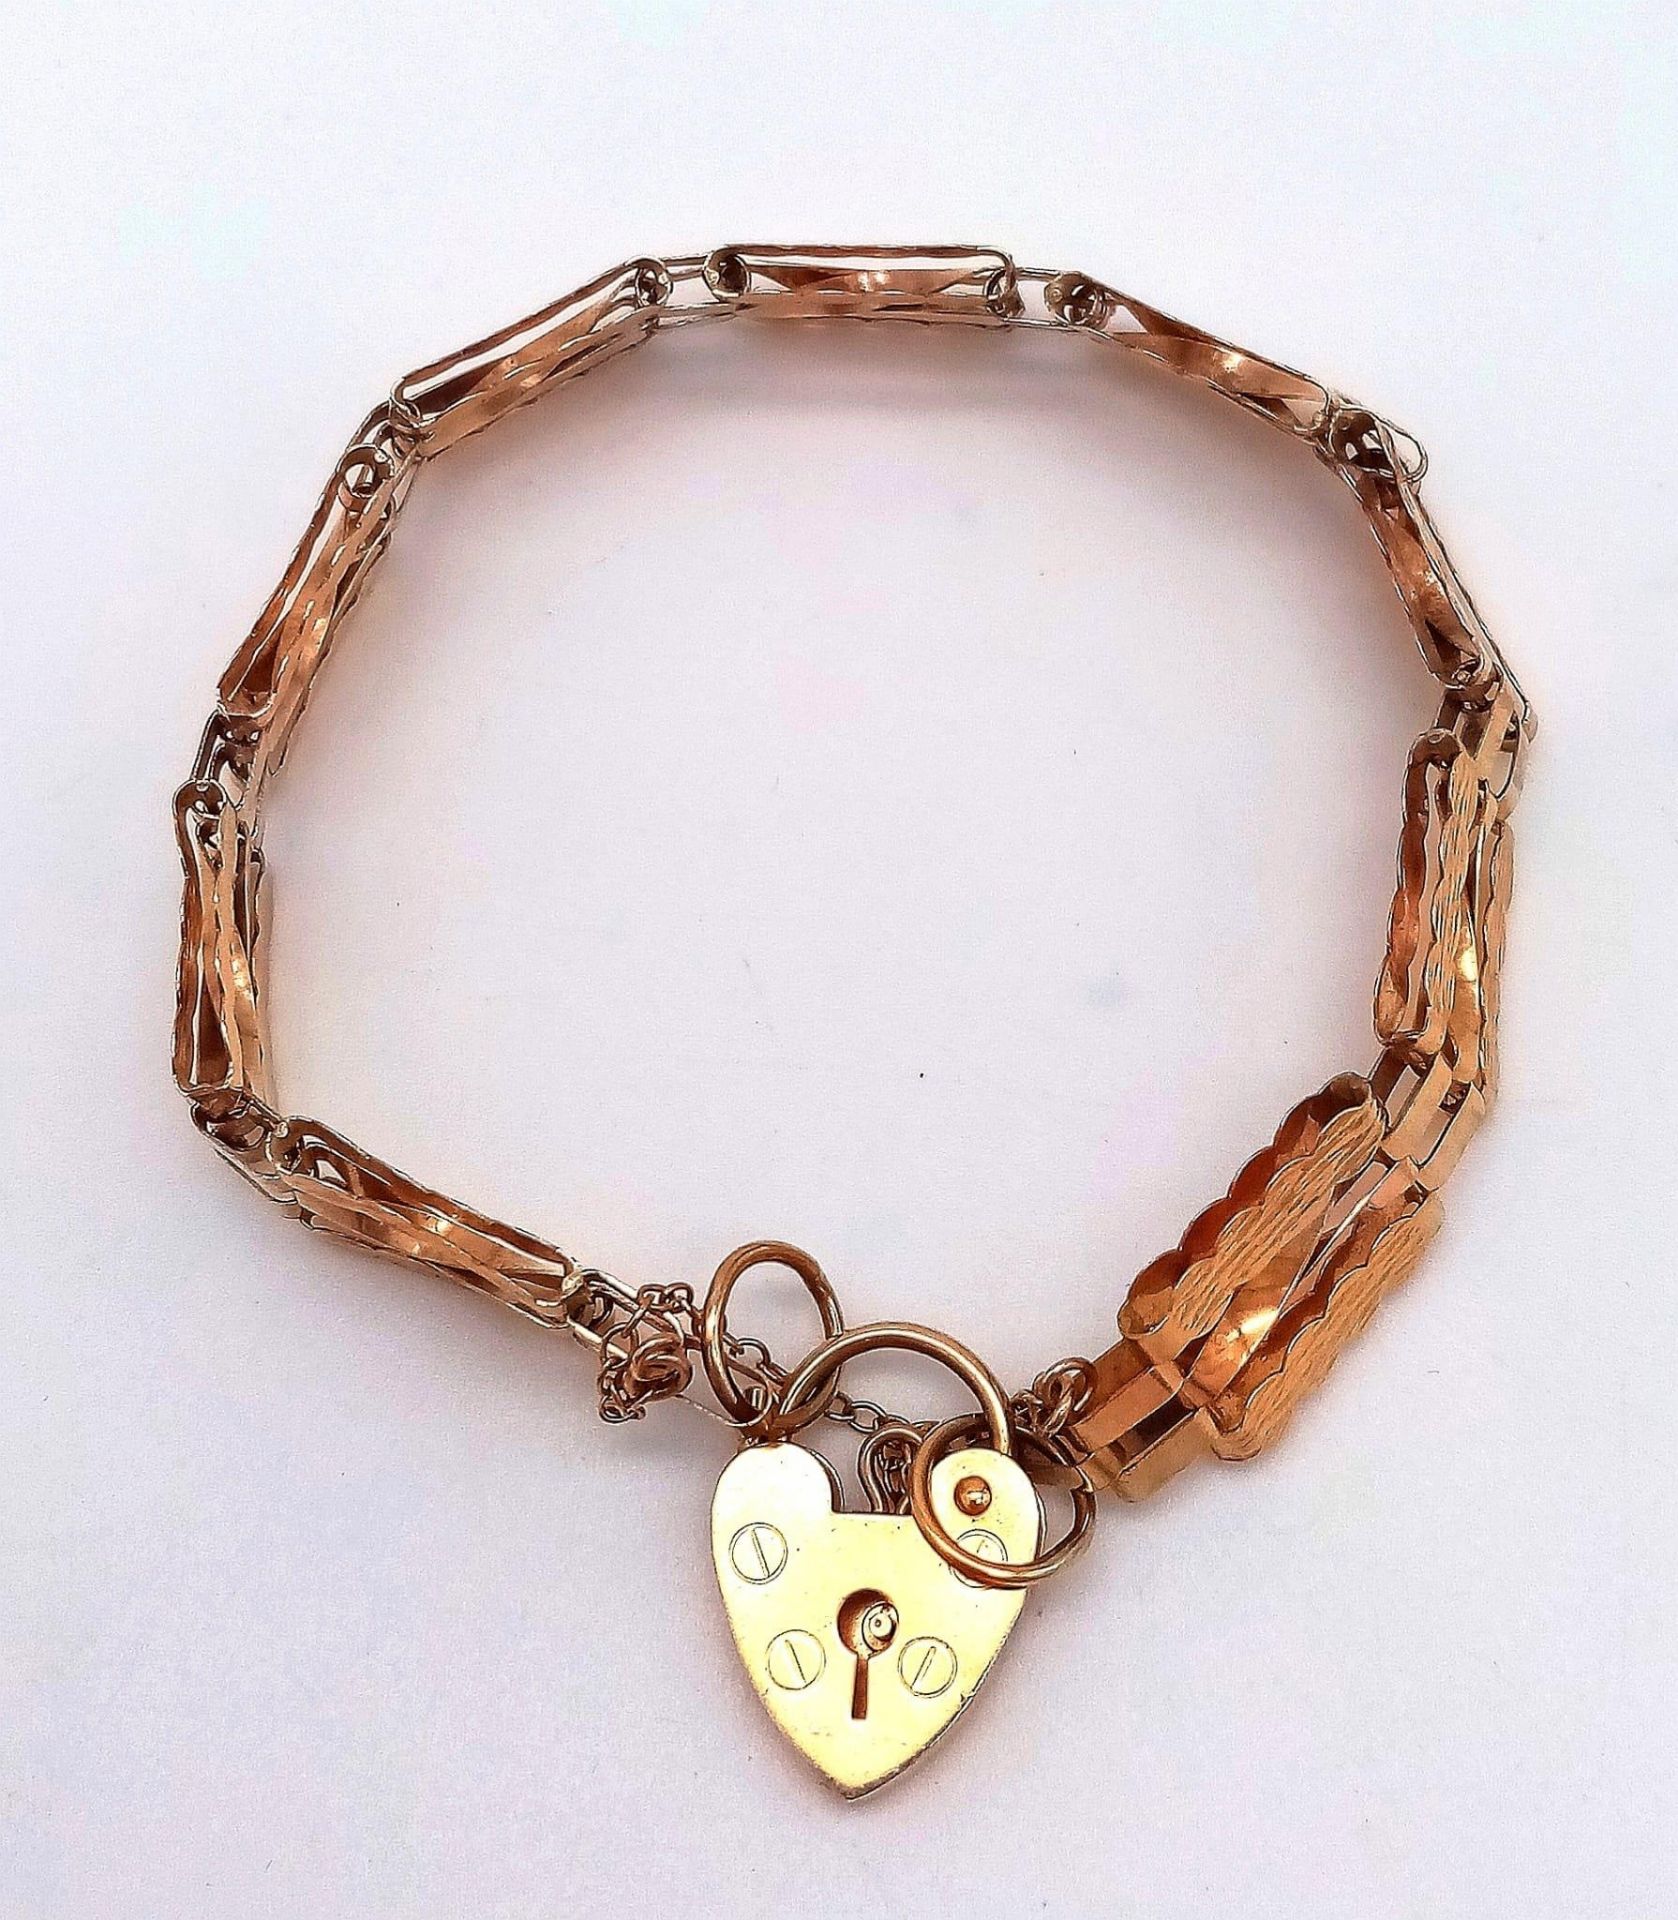 AN ANTIQUE 9K GOLD NICELY PATTERNED GATE BRACELET WITH HEART PADLOCK AND SAFETY CHAIN . 8.1gms - Image 6 of 9